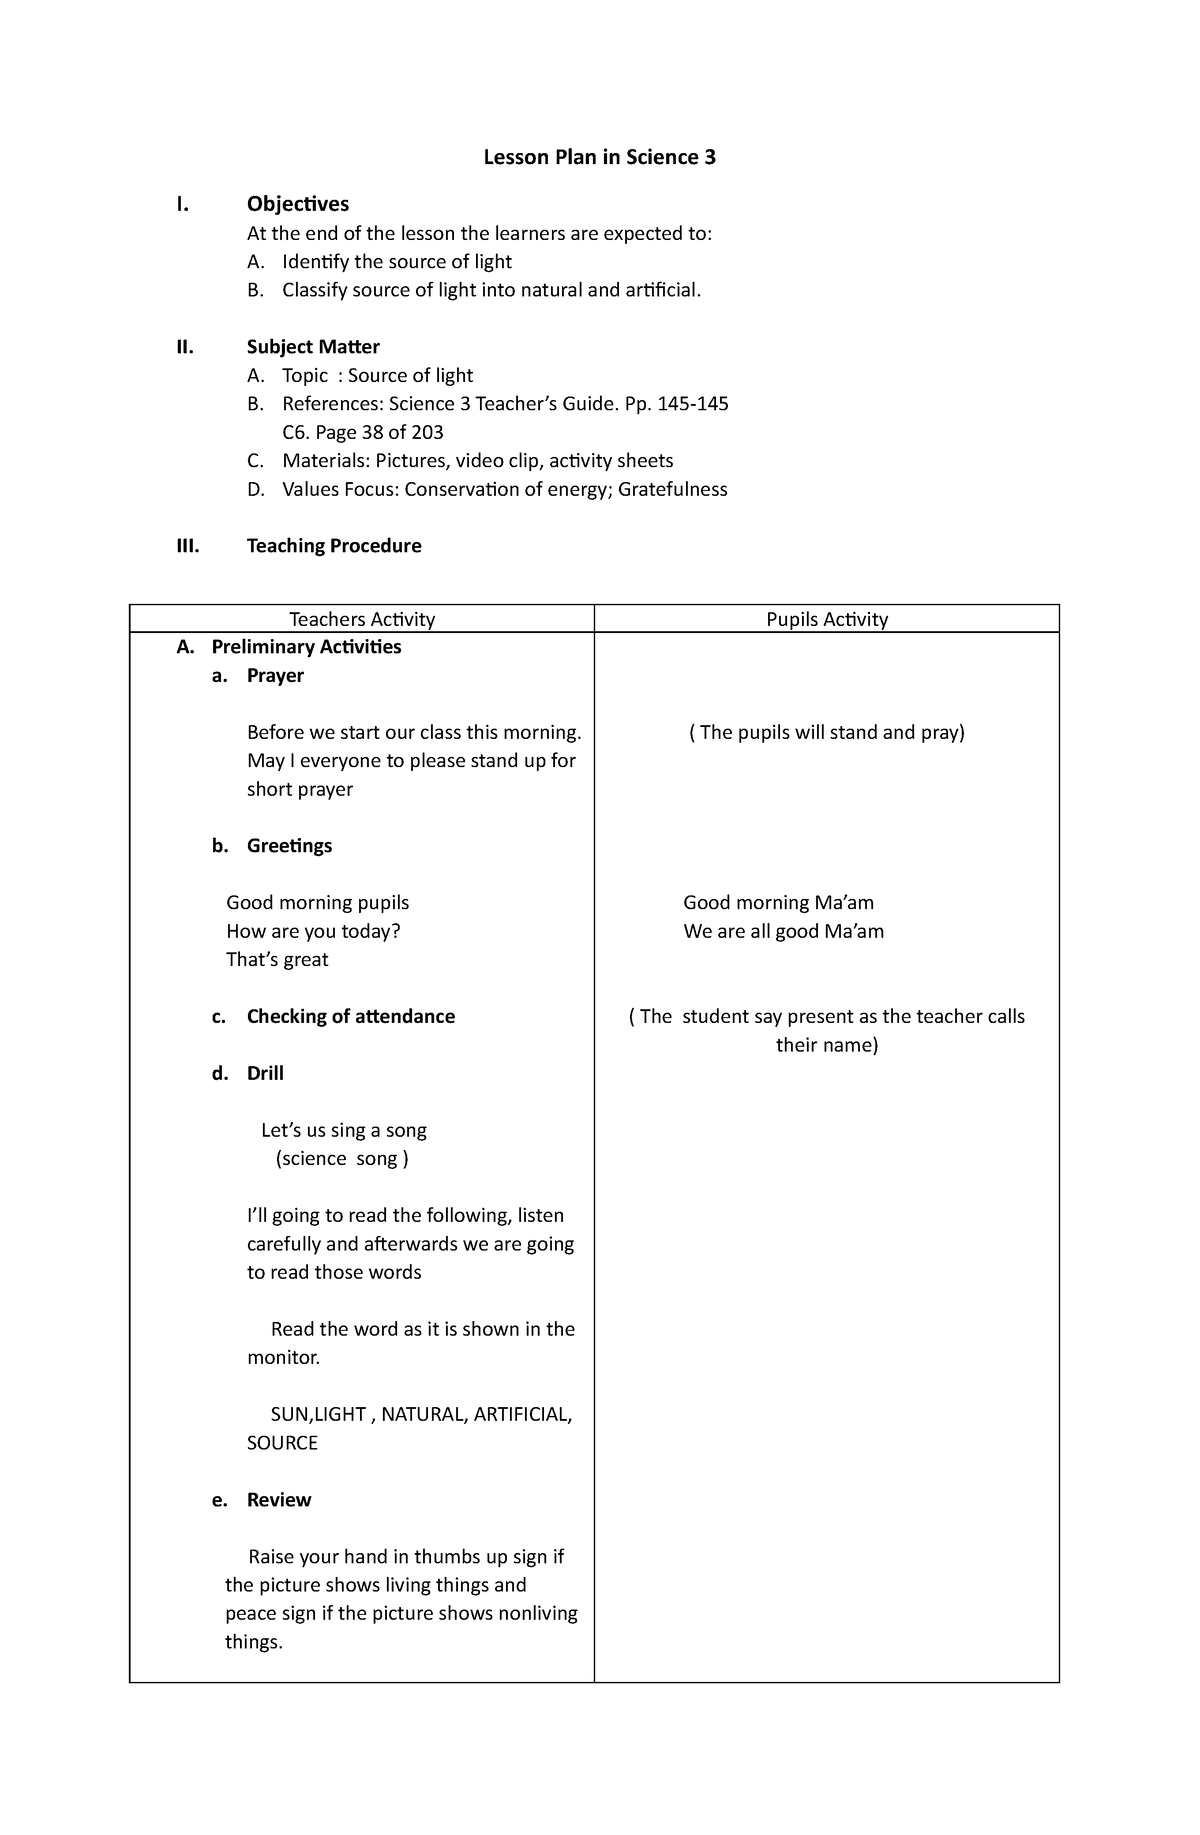 Science LP - Lesson Plan in Science 3 I. Objectives At the end of the ...